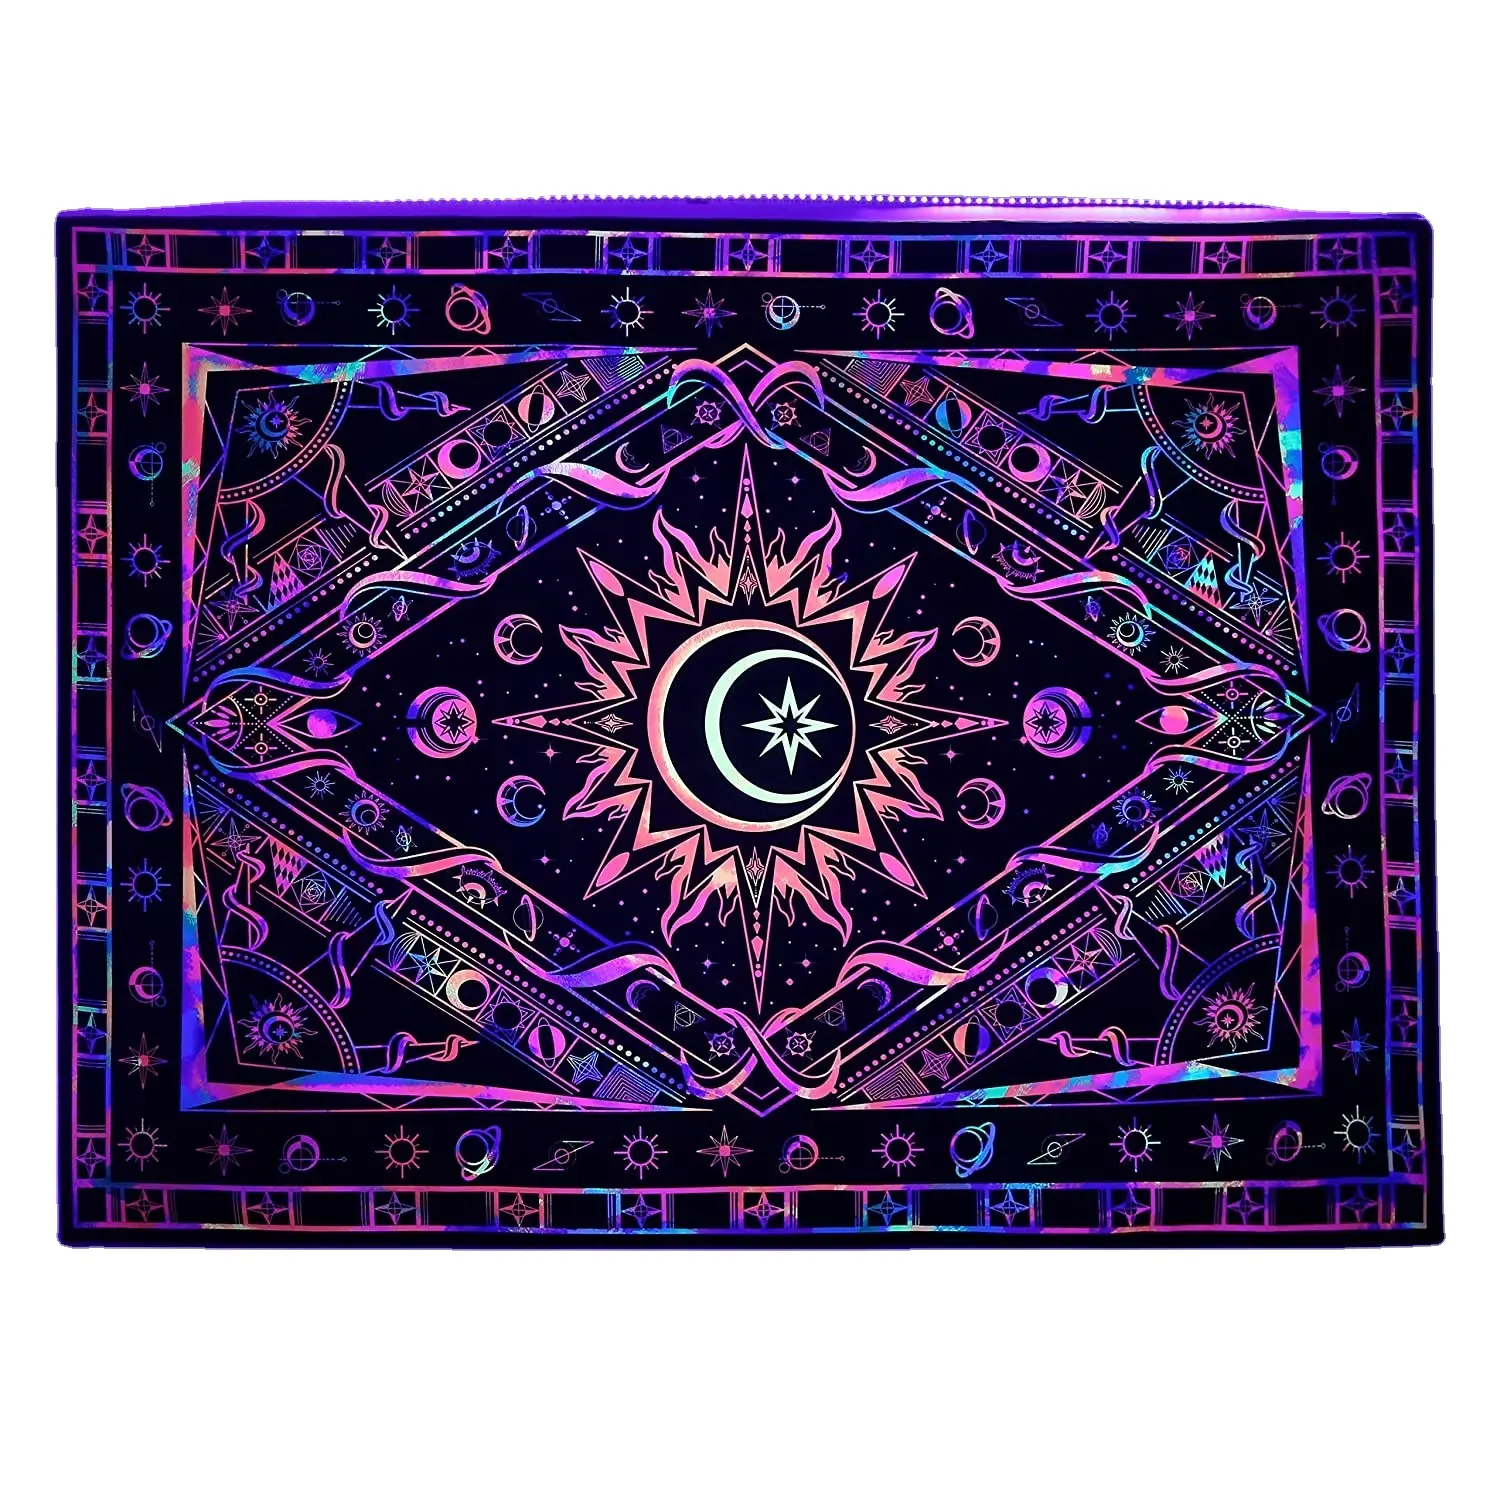 Art Fantasy and Premium Wall Tapestry Home Decor 100% Polyester Printing 3D Wholesale Tapestry 73x95cm Custom Tapestries